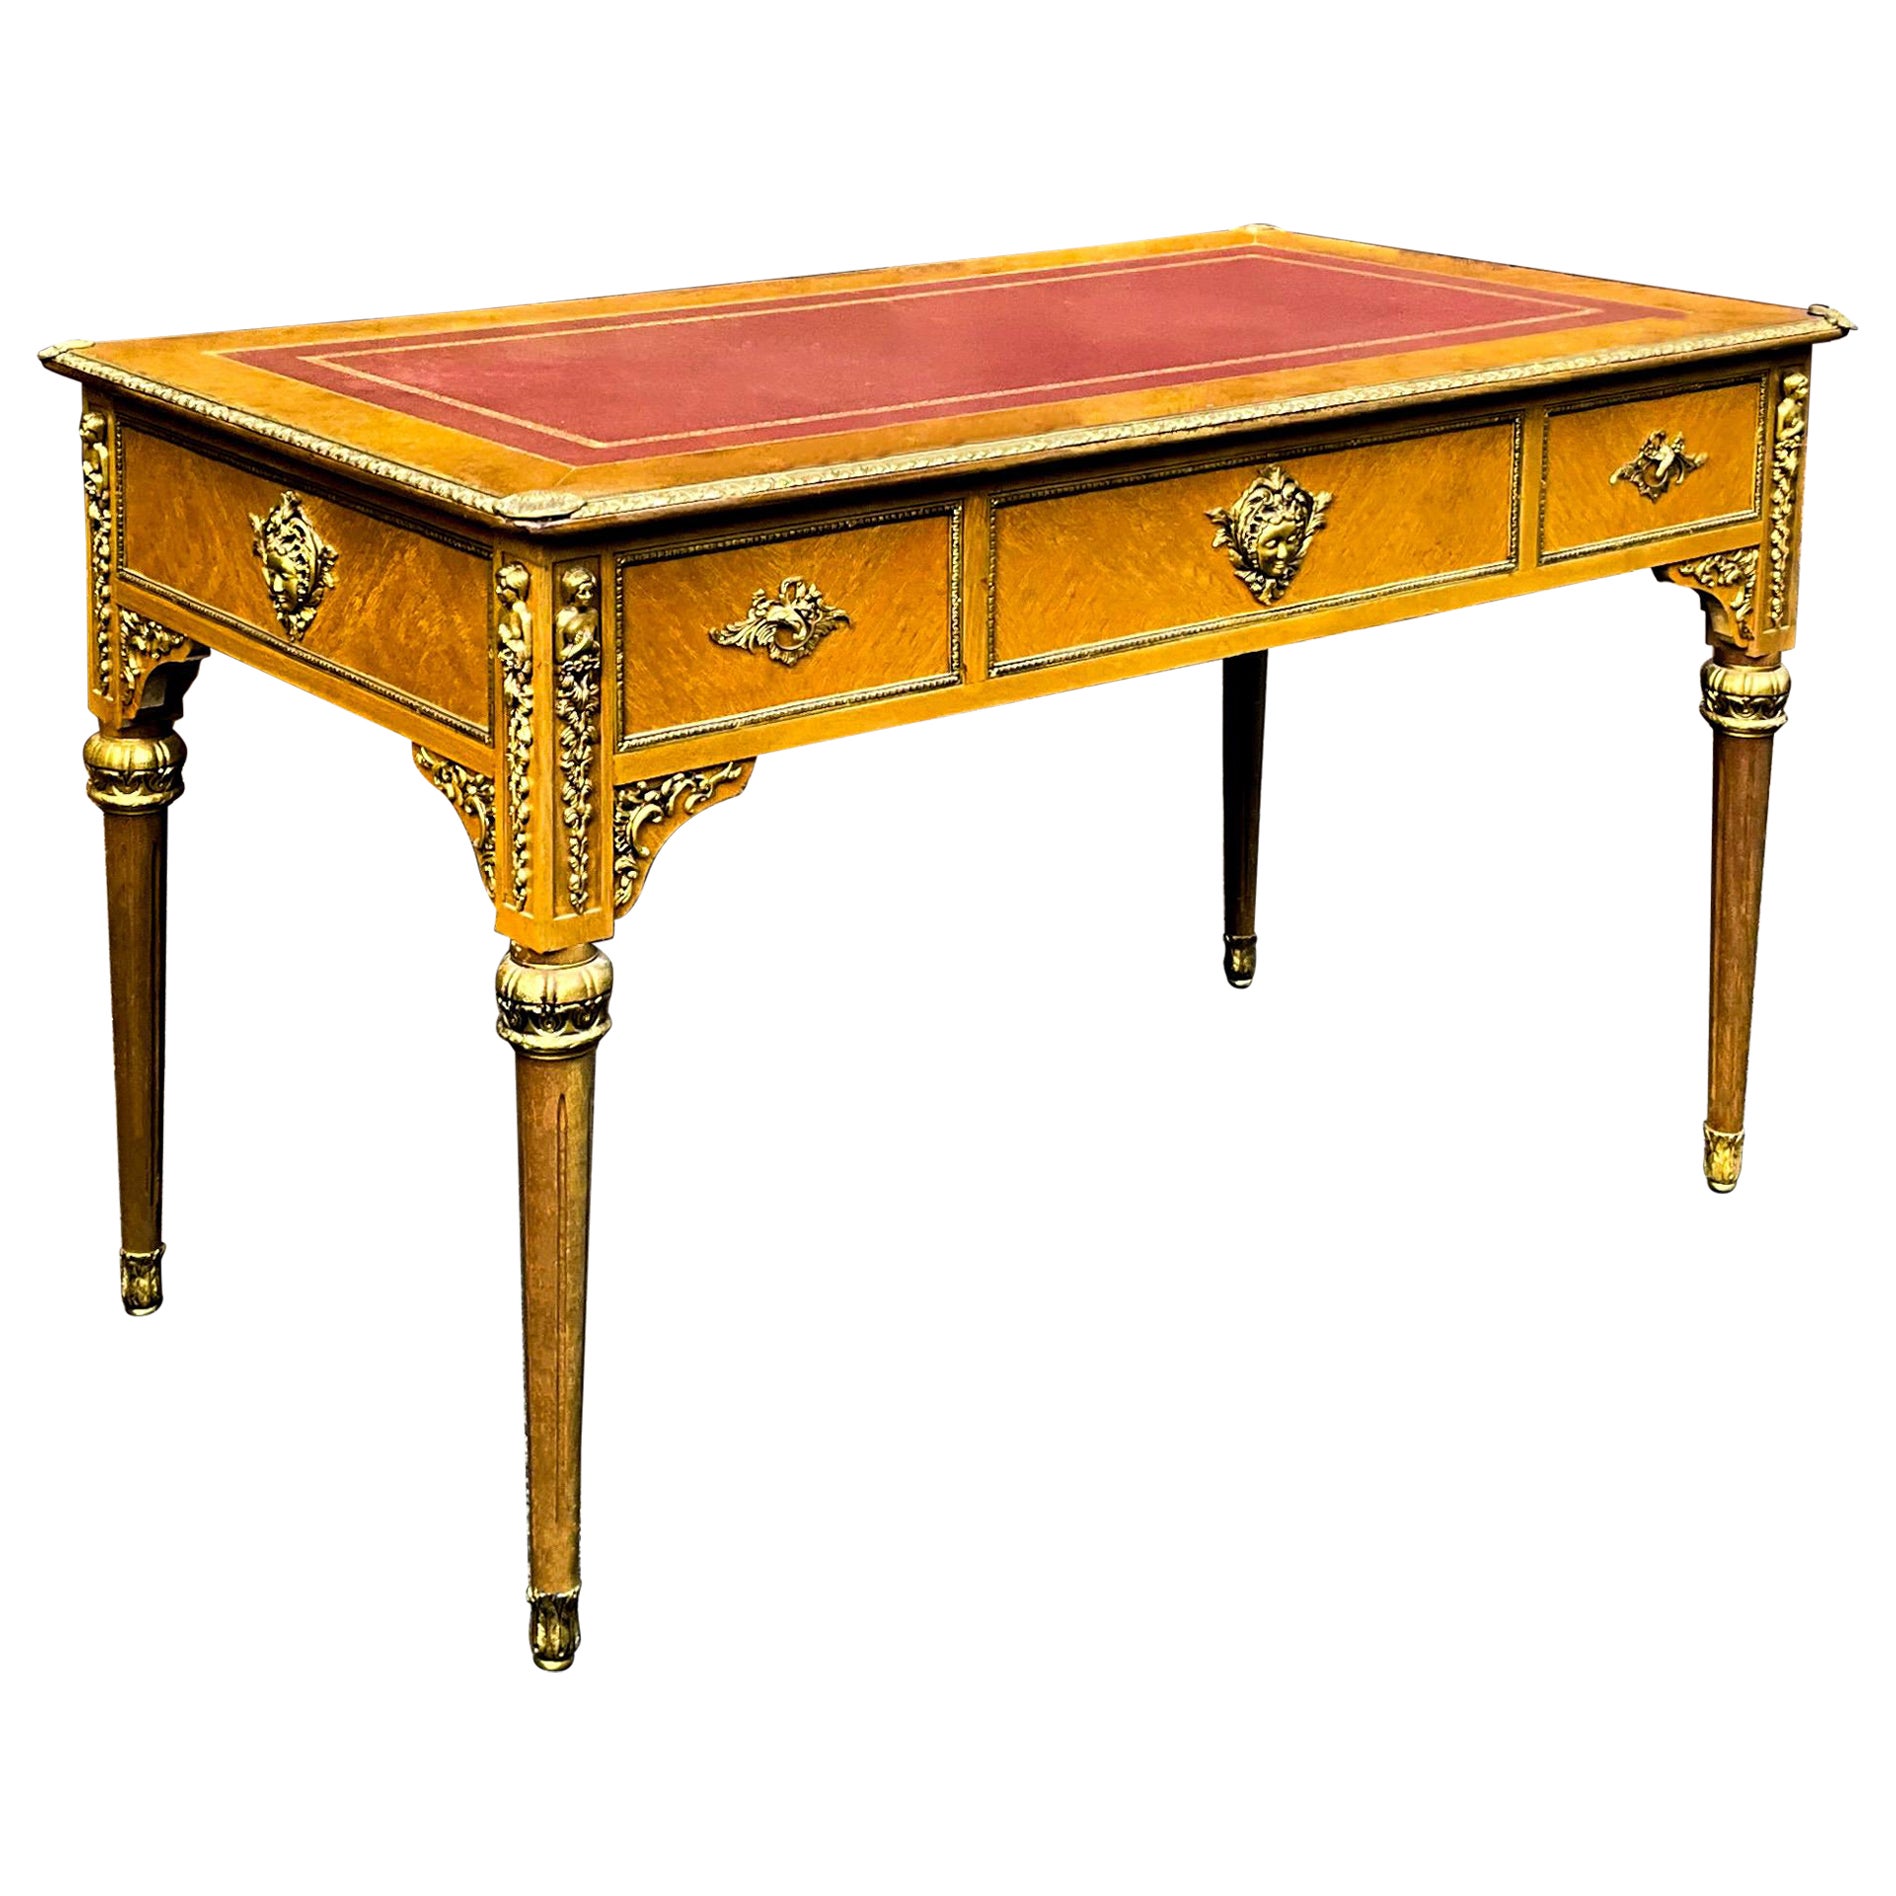 French Louis XVI Style Burl Walnut / Bronze Tooled Leather Desk or Writing Table